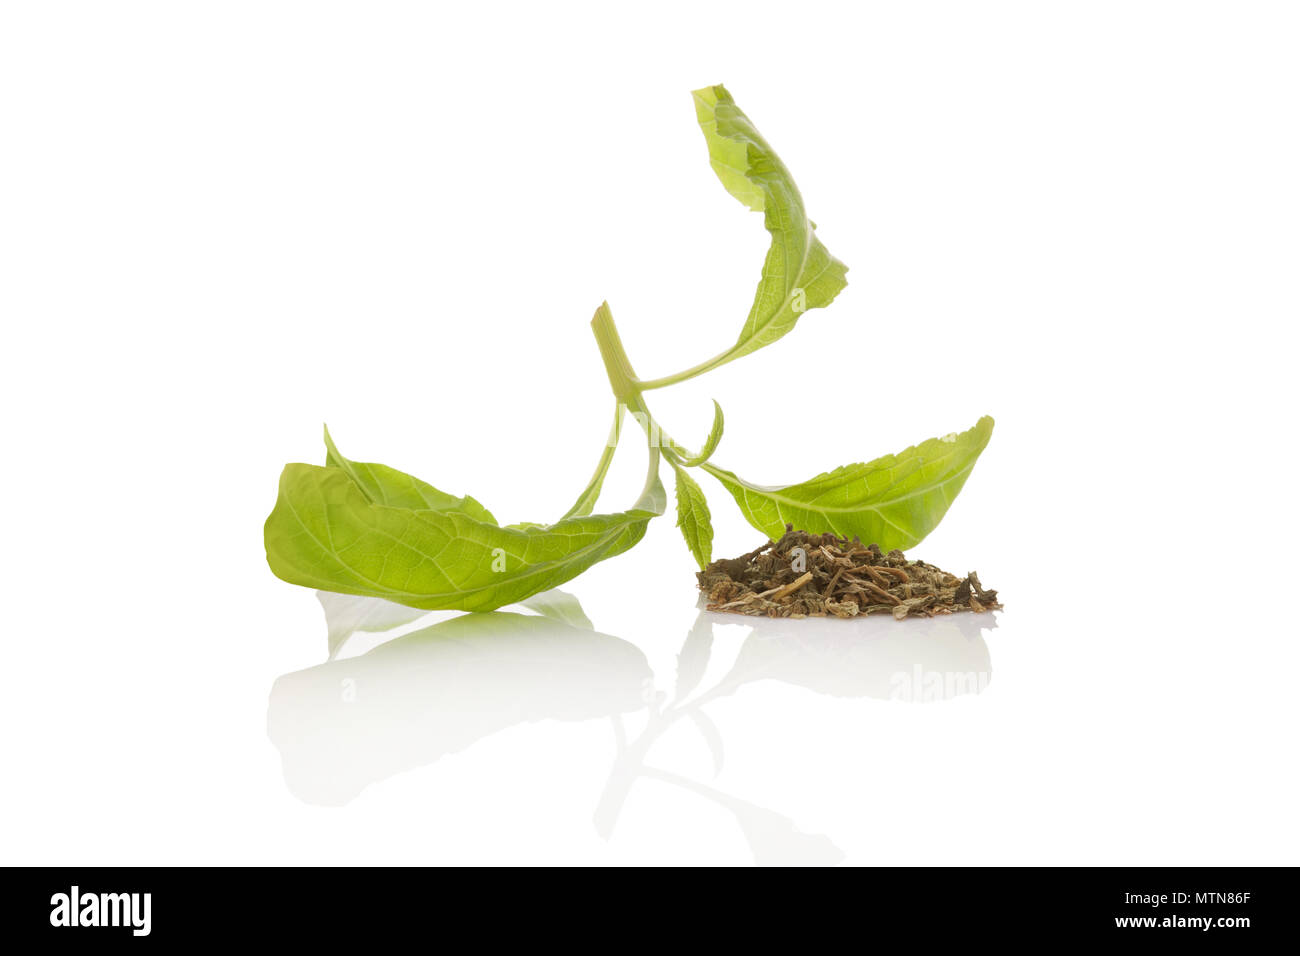 Salvia divinorum fresh and dried leaves isolated on white background. Stock Photo